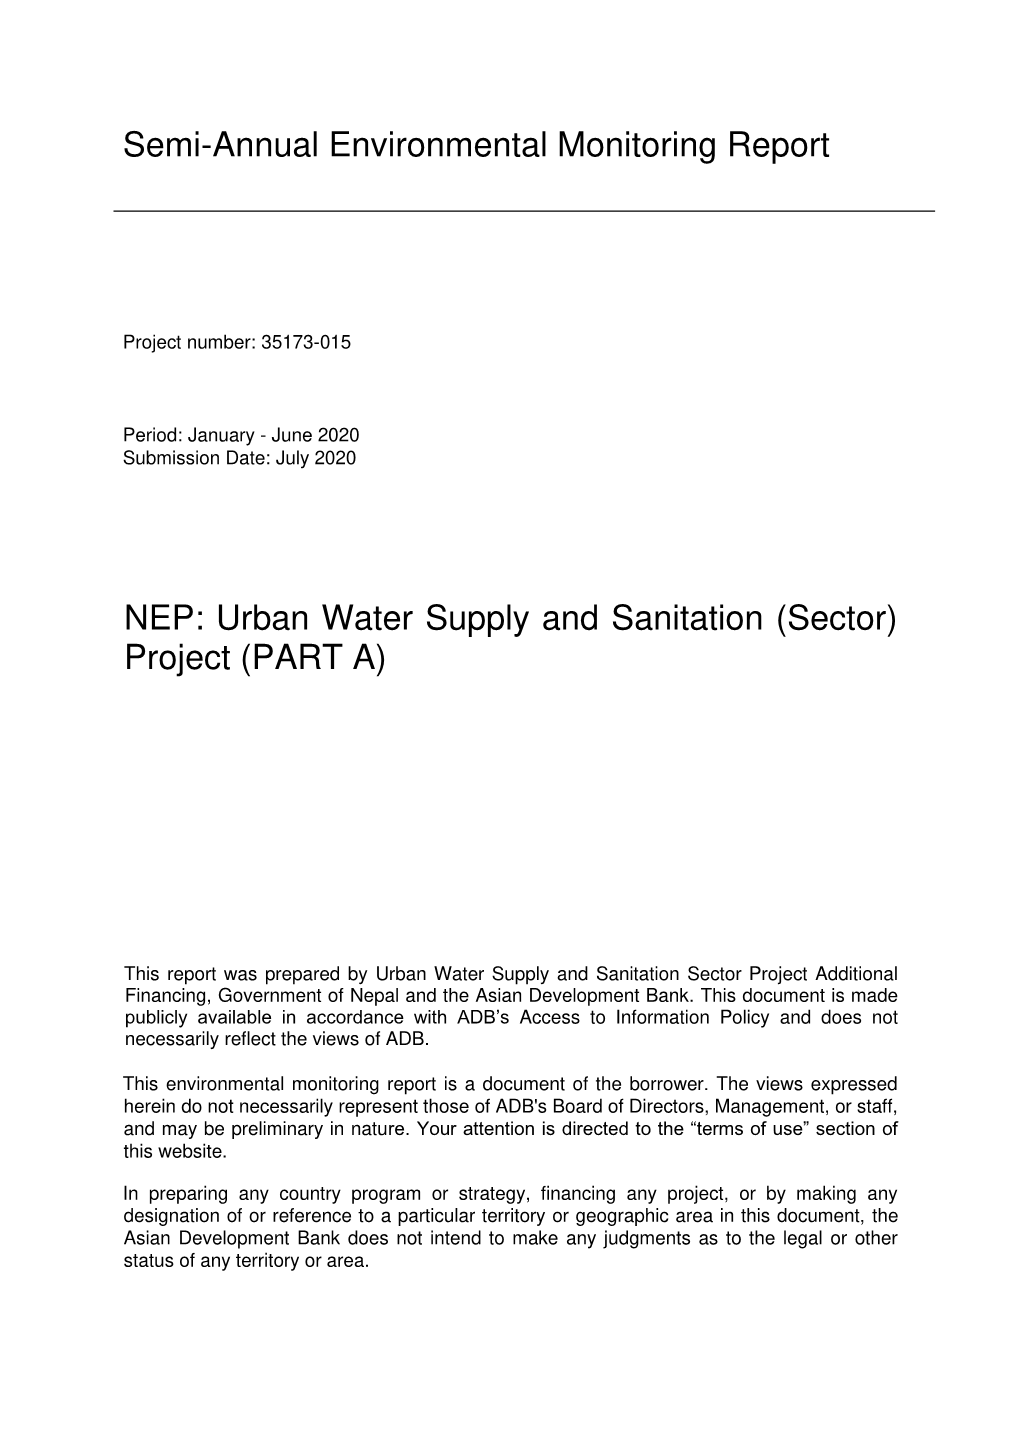 Urban Water Supply and Sanitation (Sector) Project (PART A)